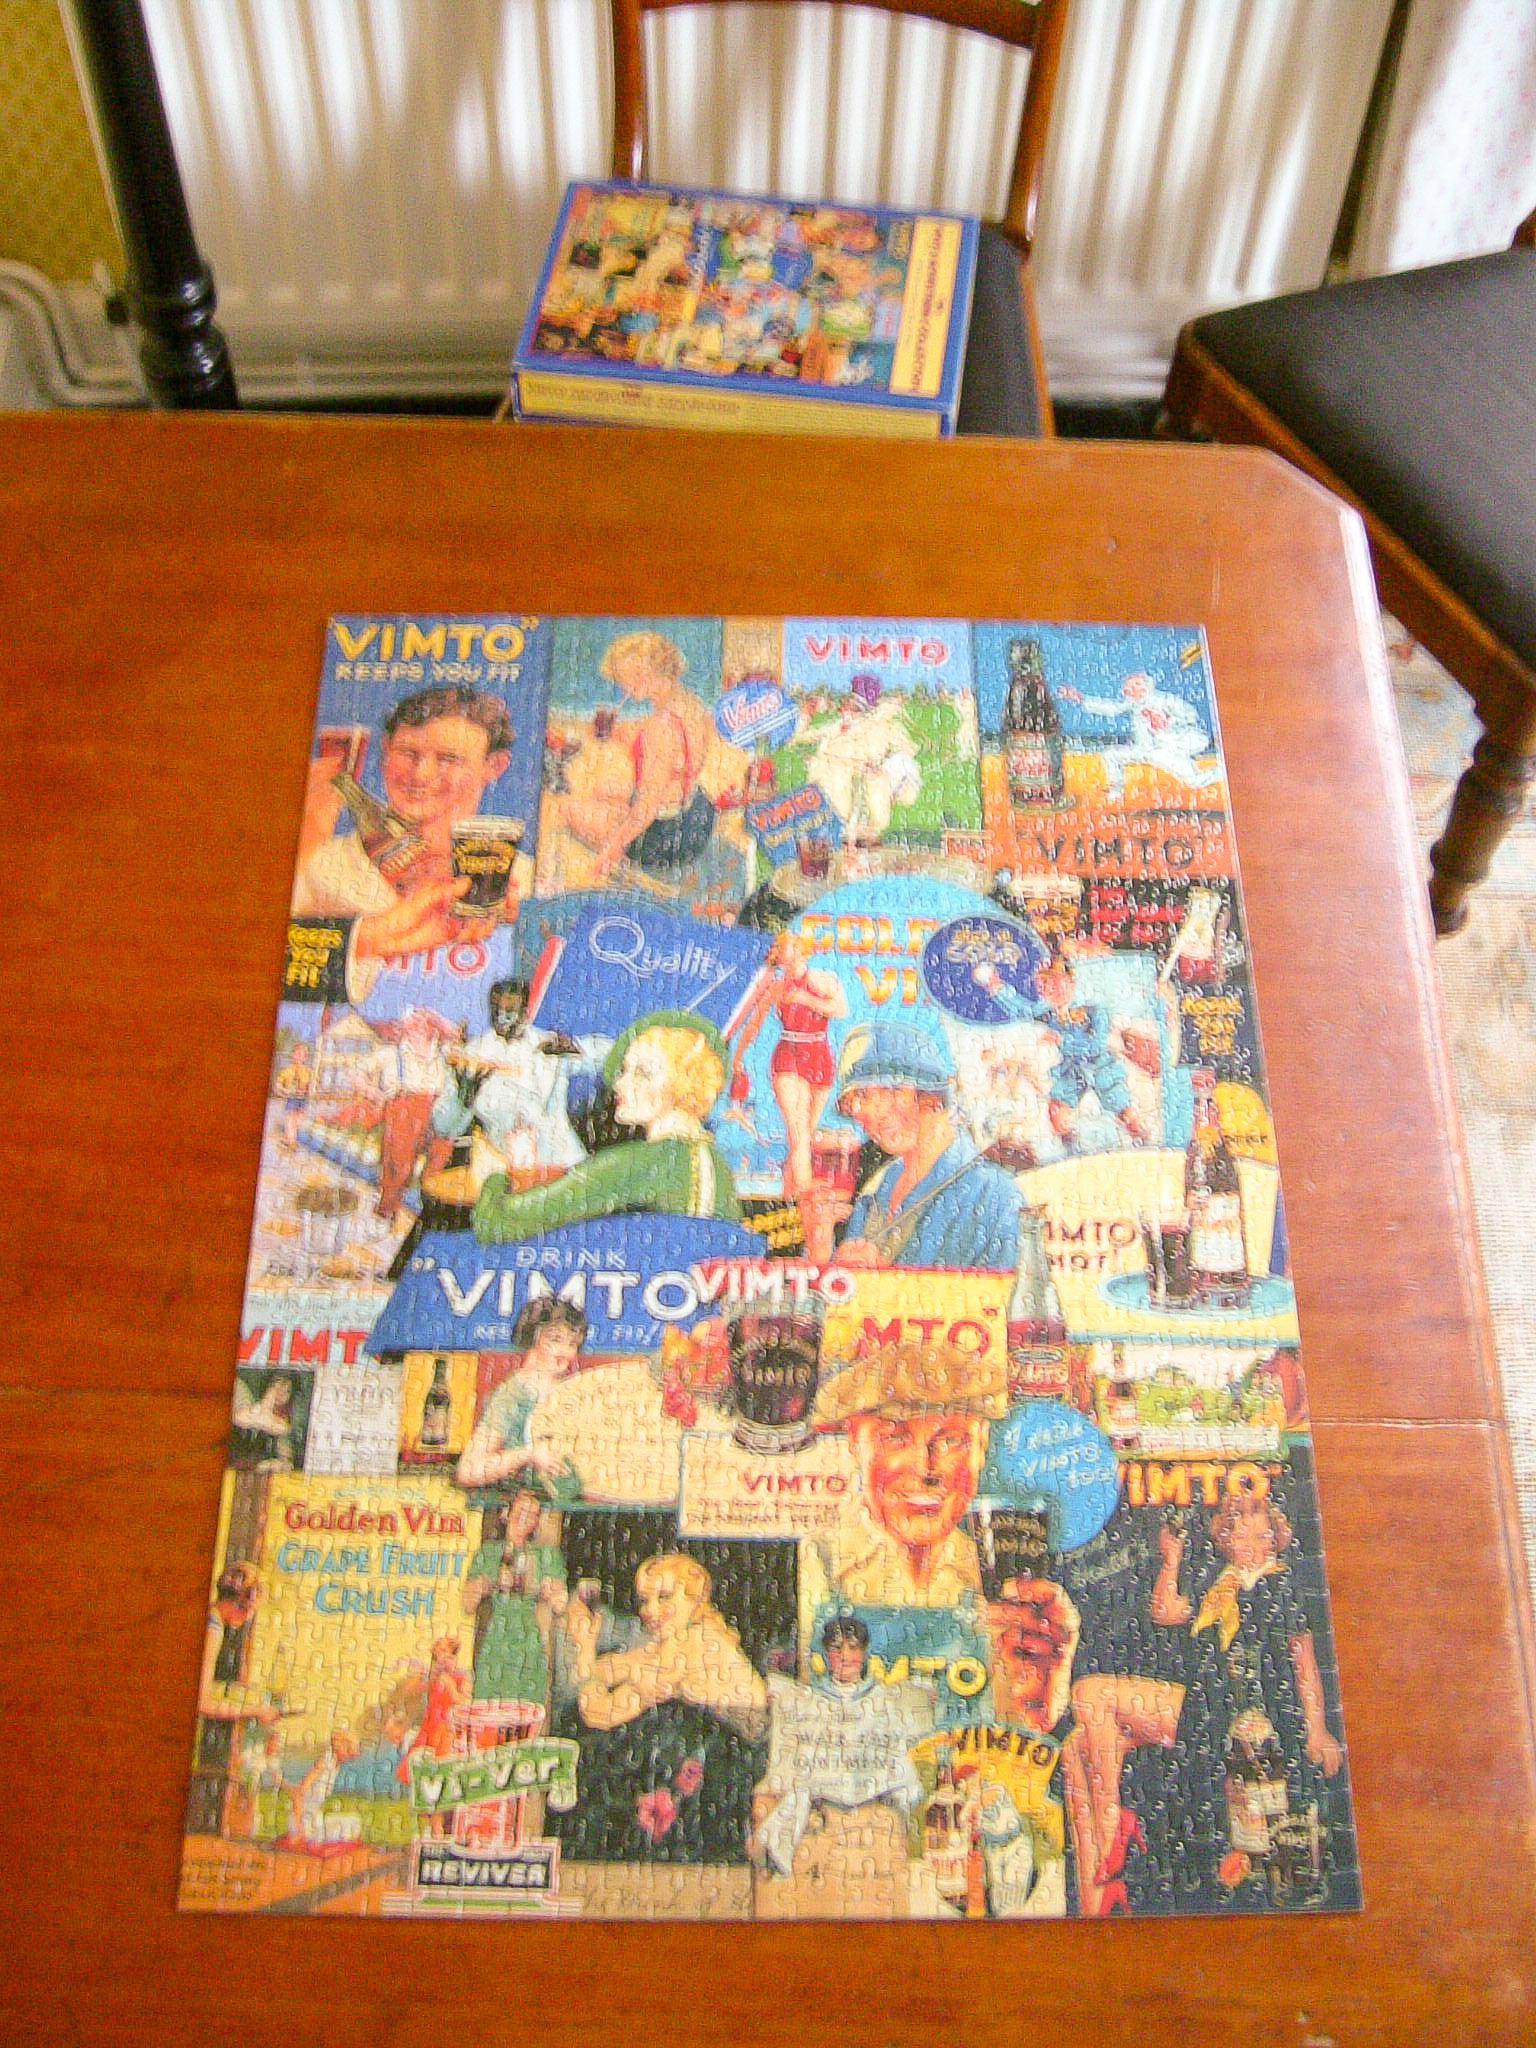 Completed jigsaw